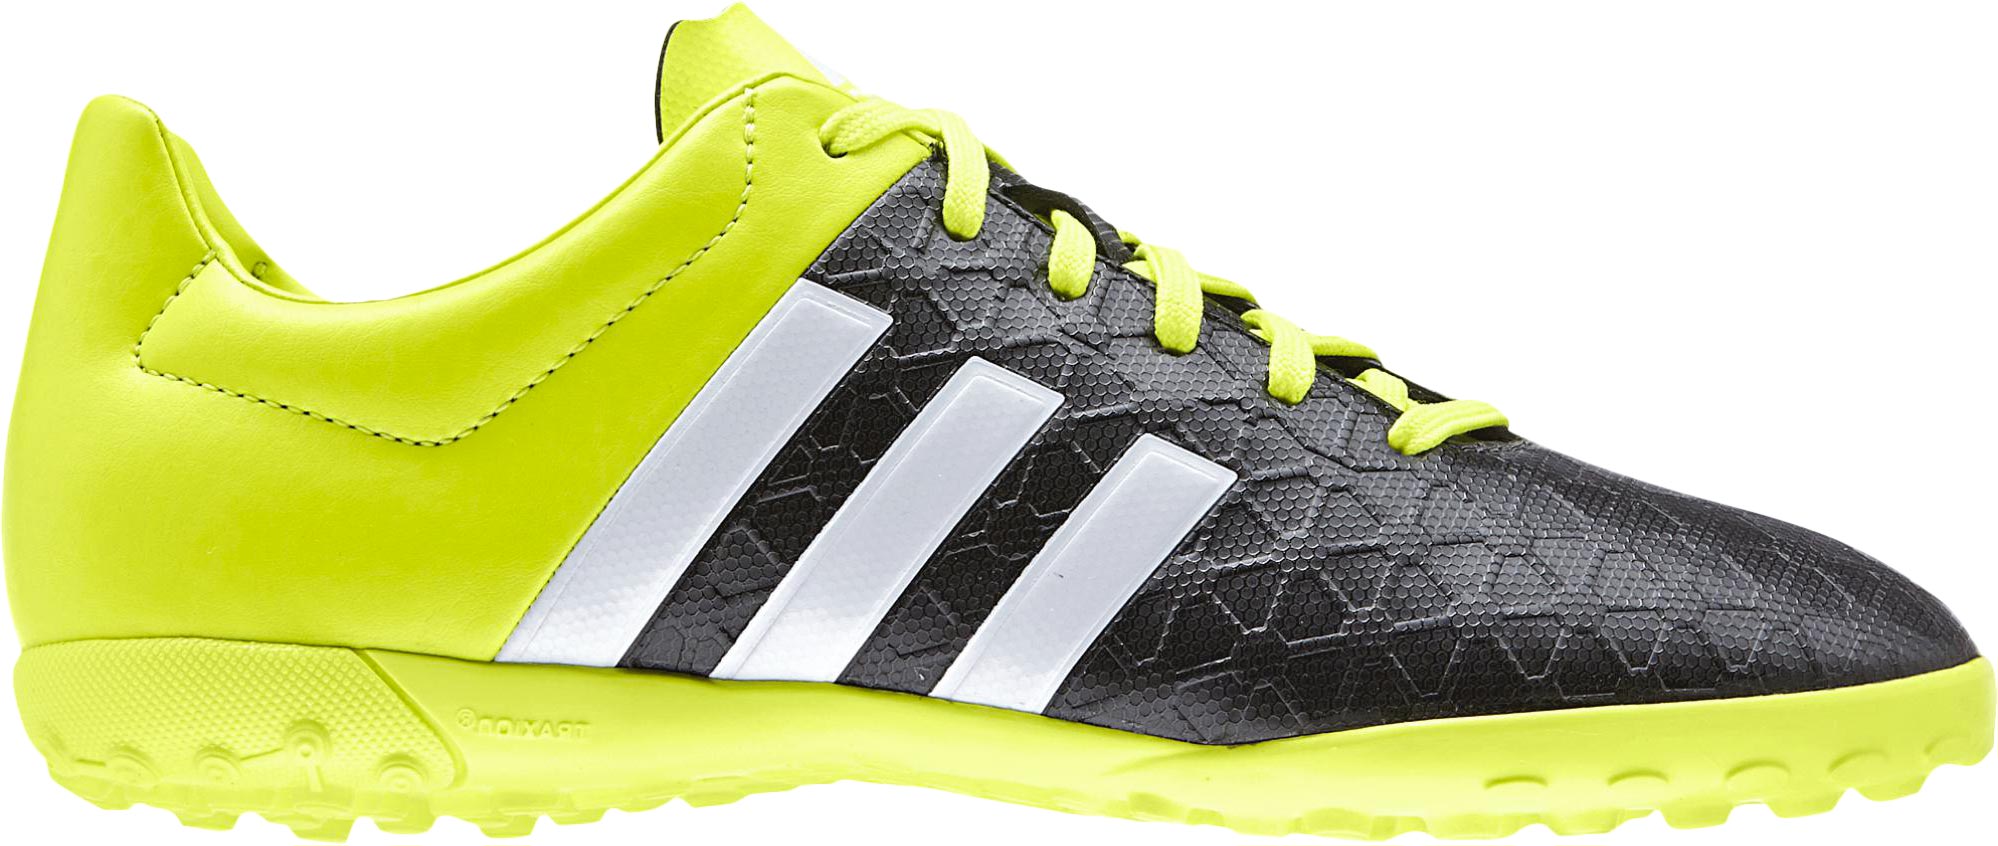 adidas ace 15.4 in